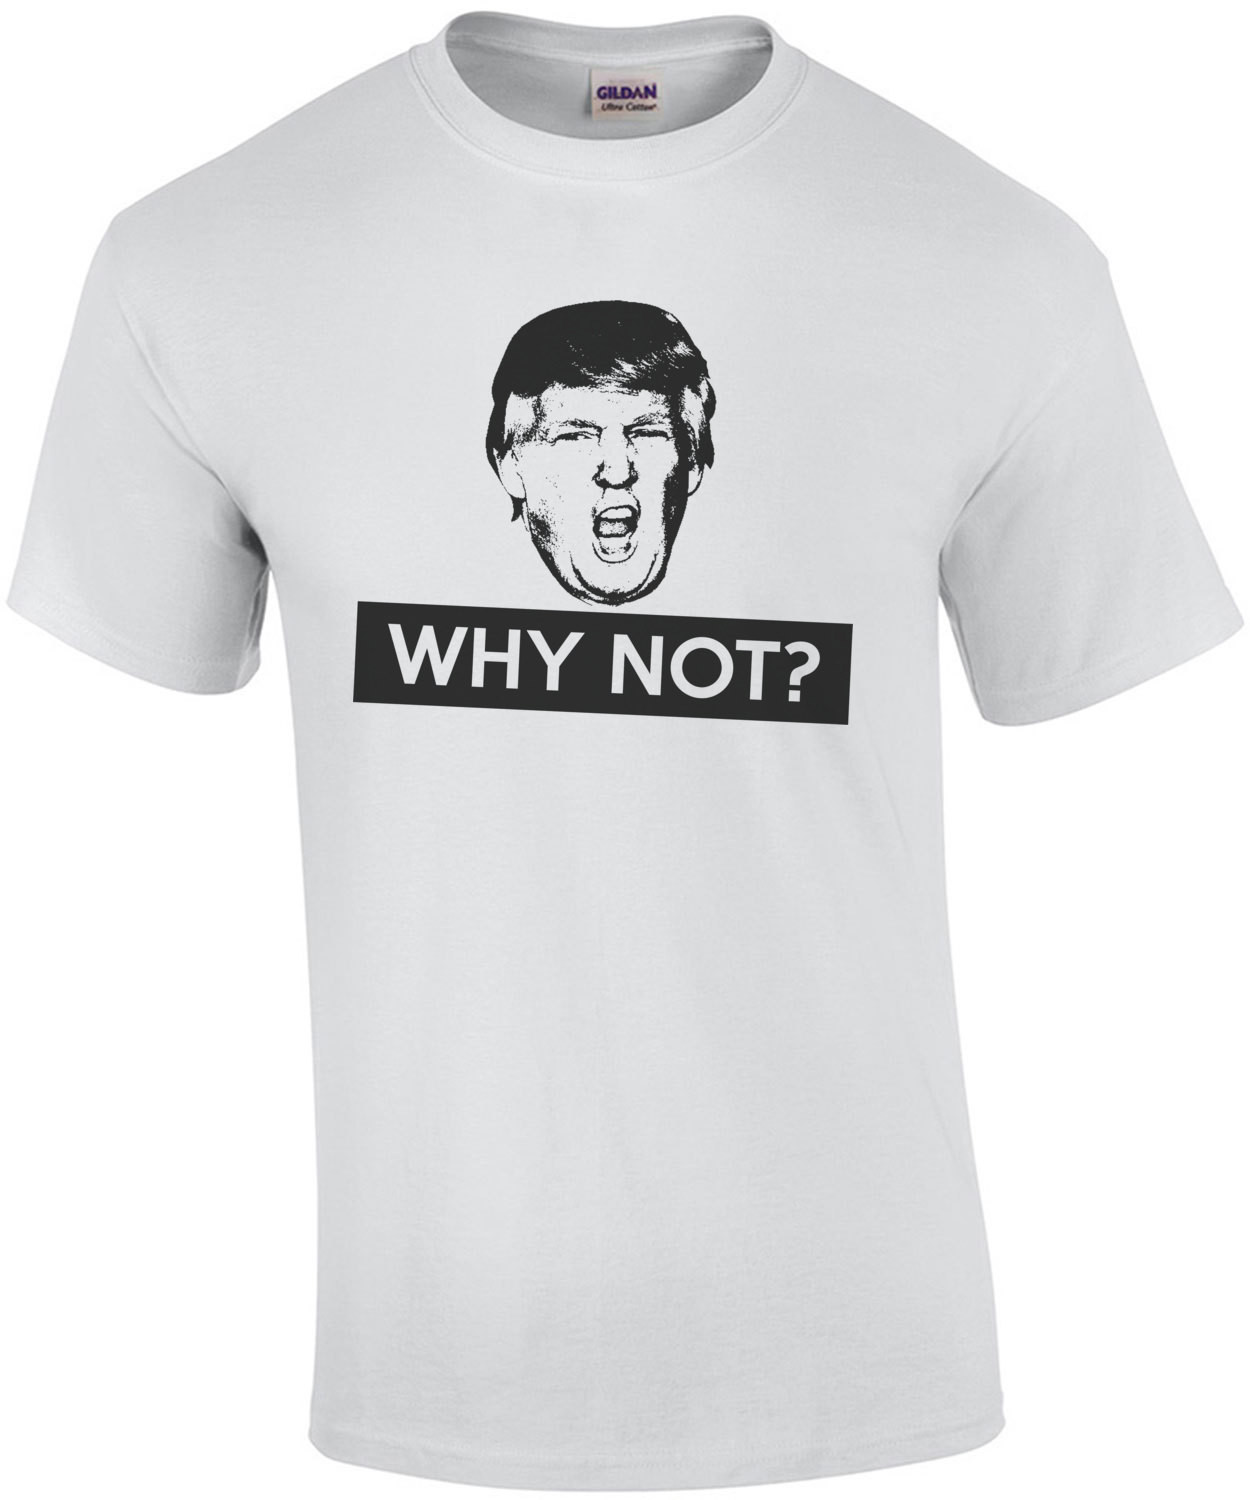 Why Not? Donald Trump T-Shirt